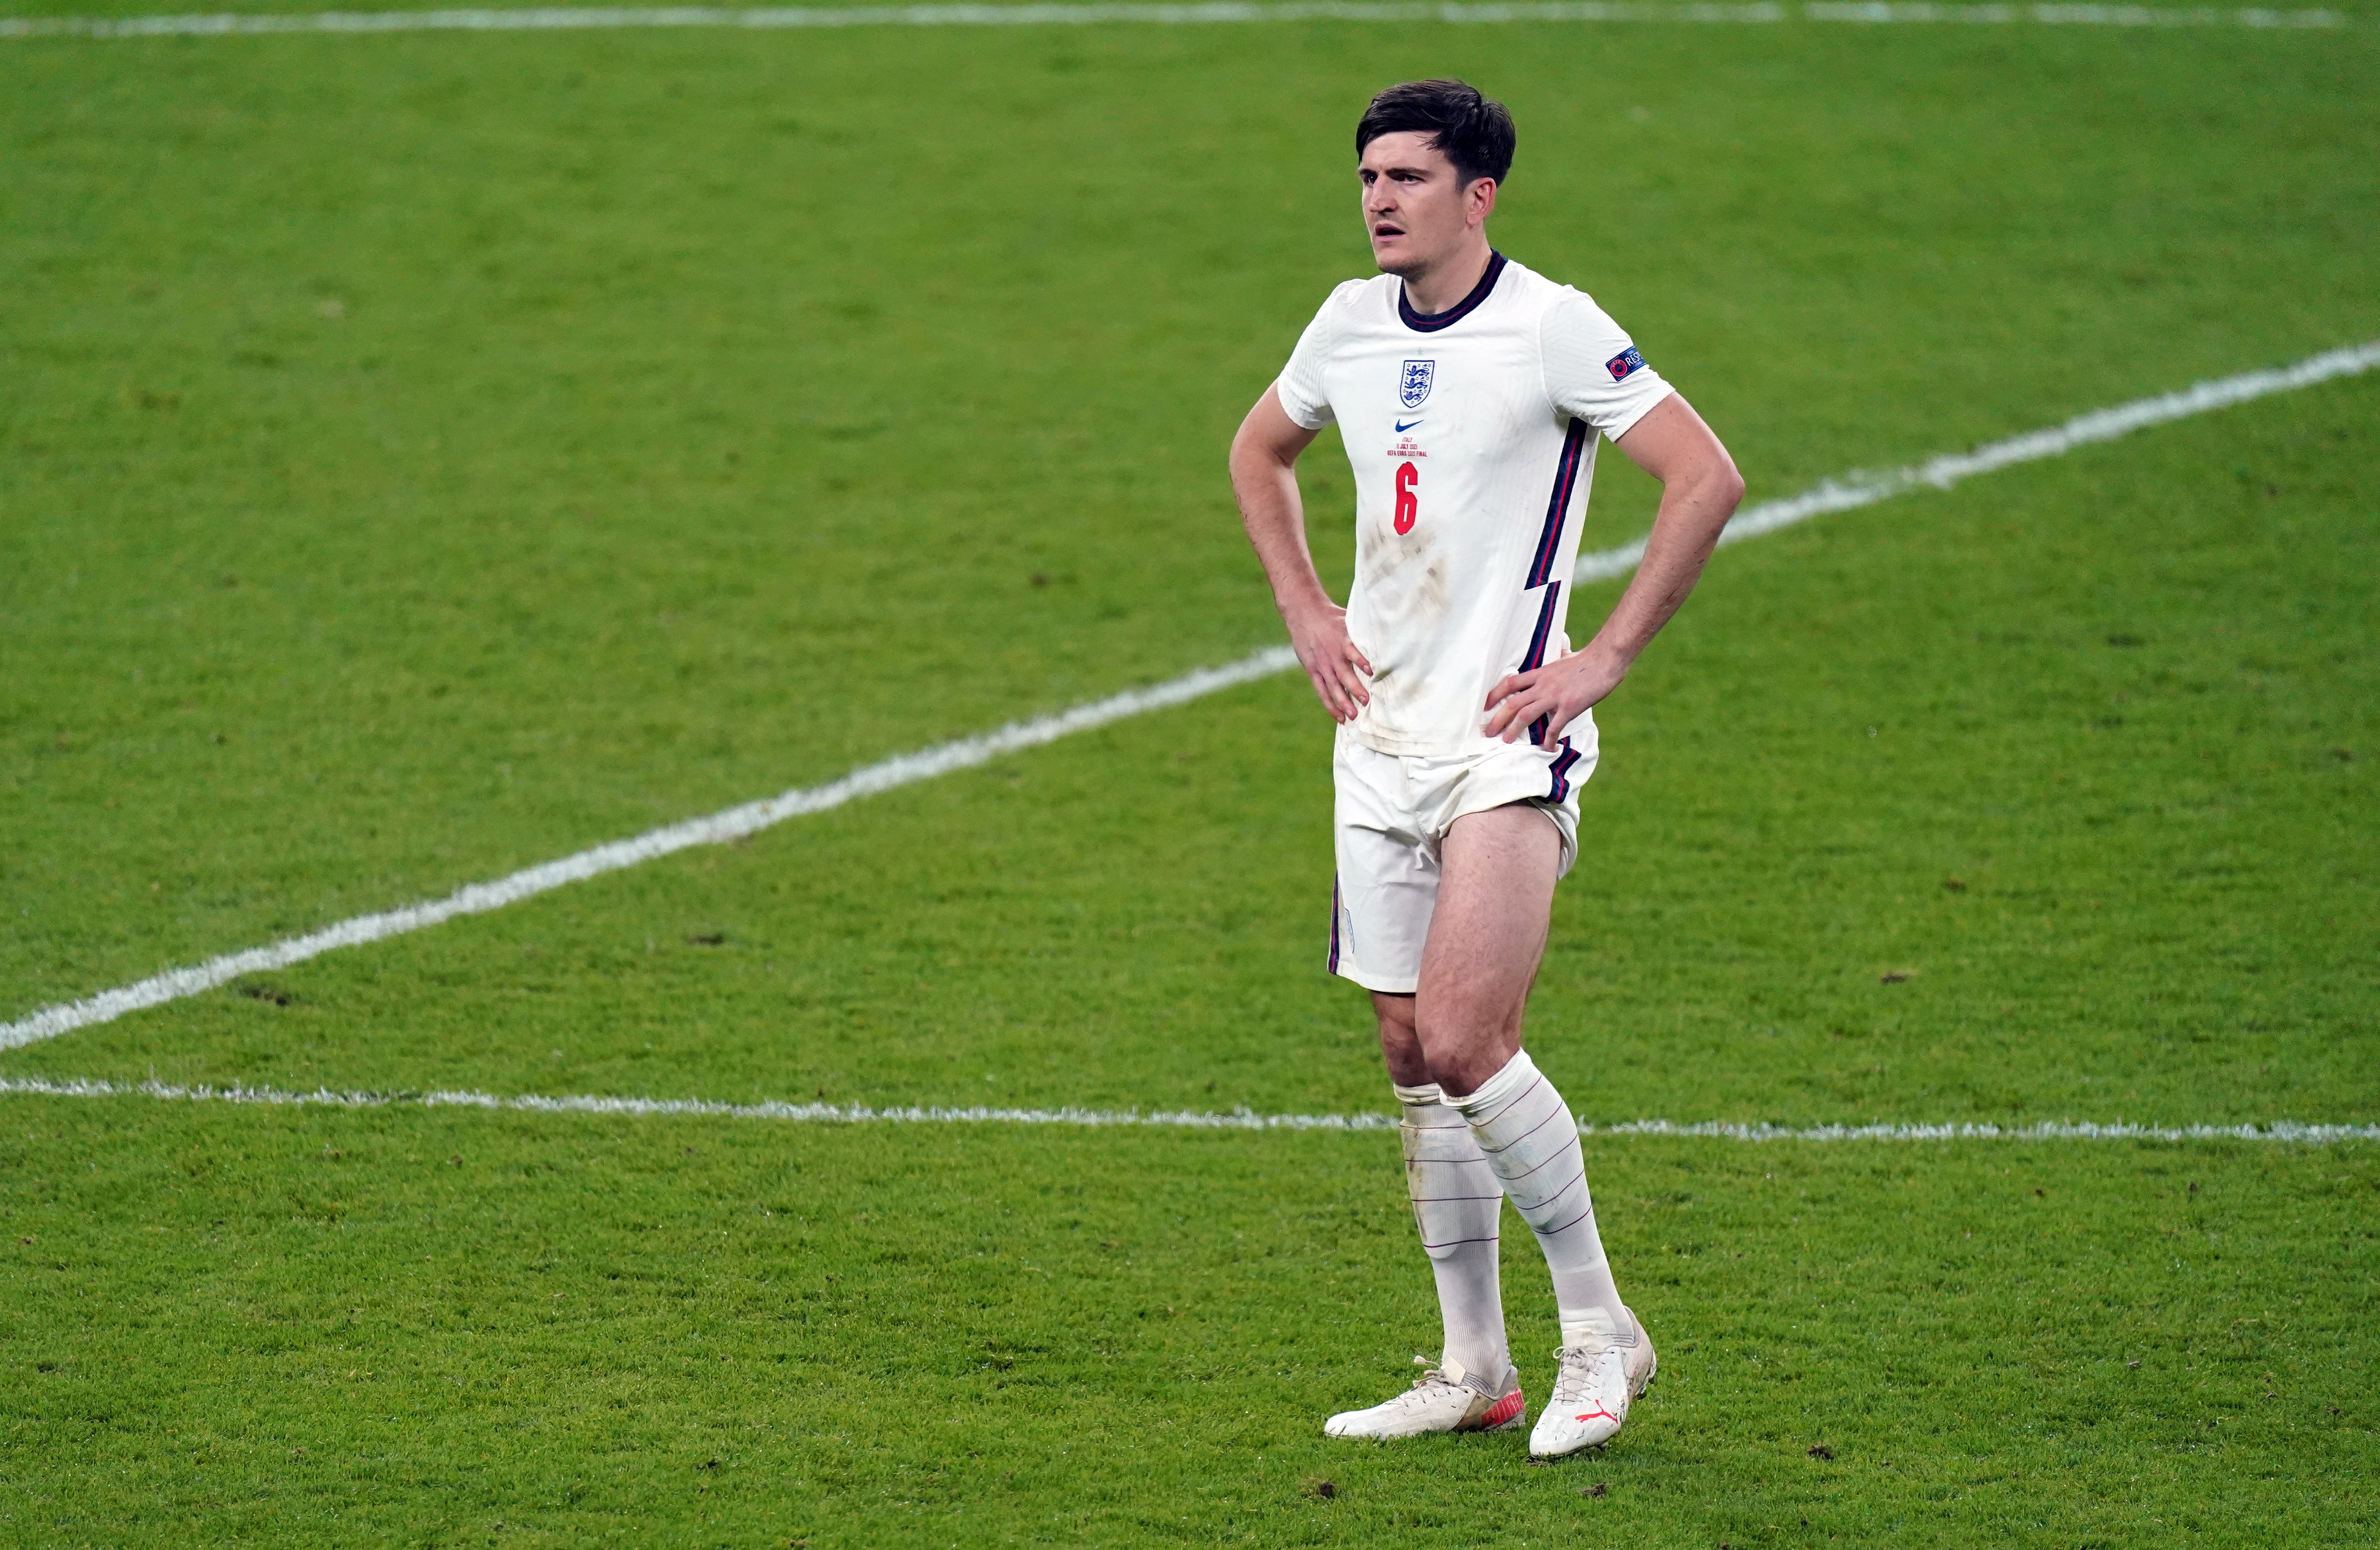 Harry Maguire is pictured at Wembley on 11 July, 2021.